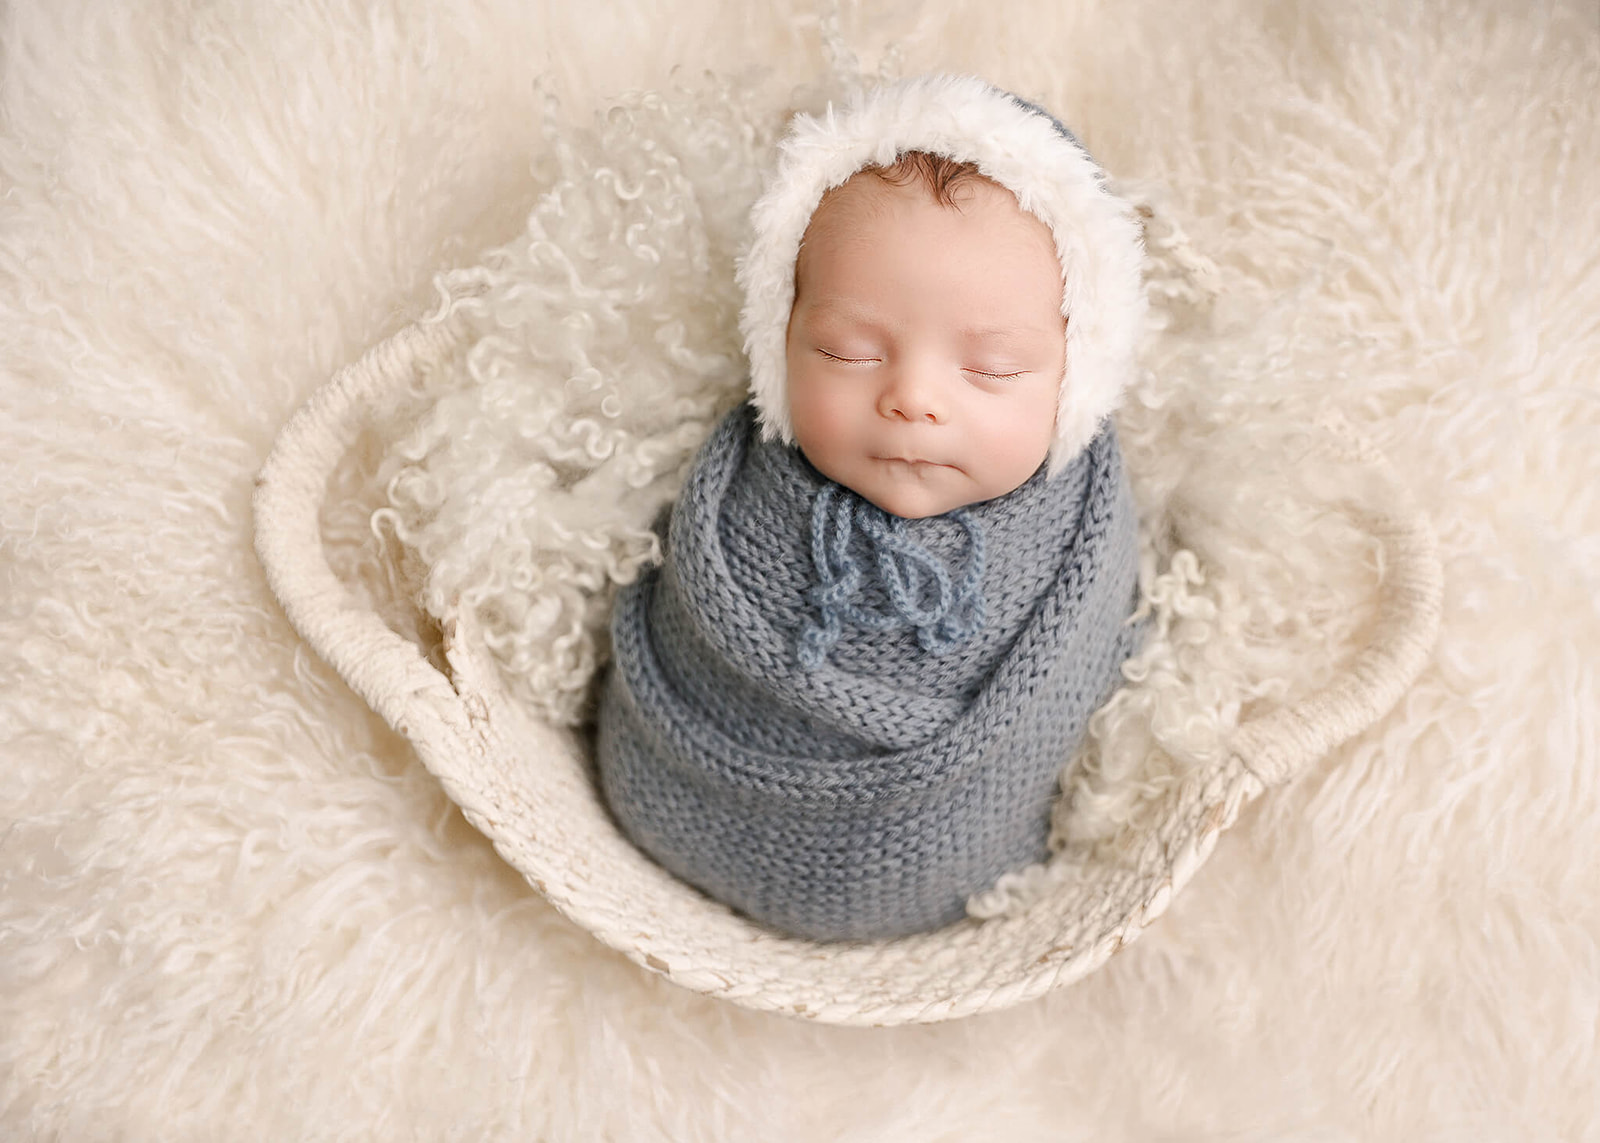 A newborn baby sleeps in a white basket on a fur blanket in a blue knit swaddle